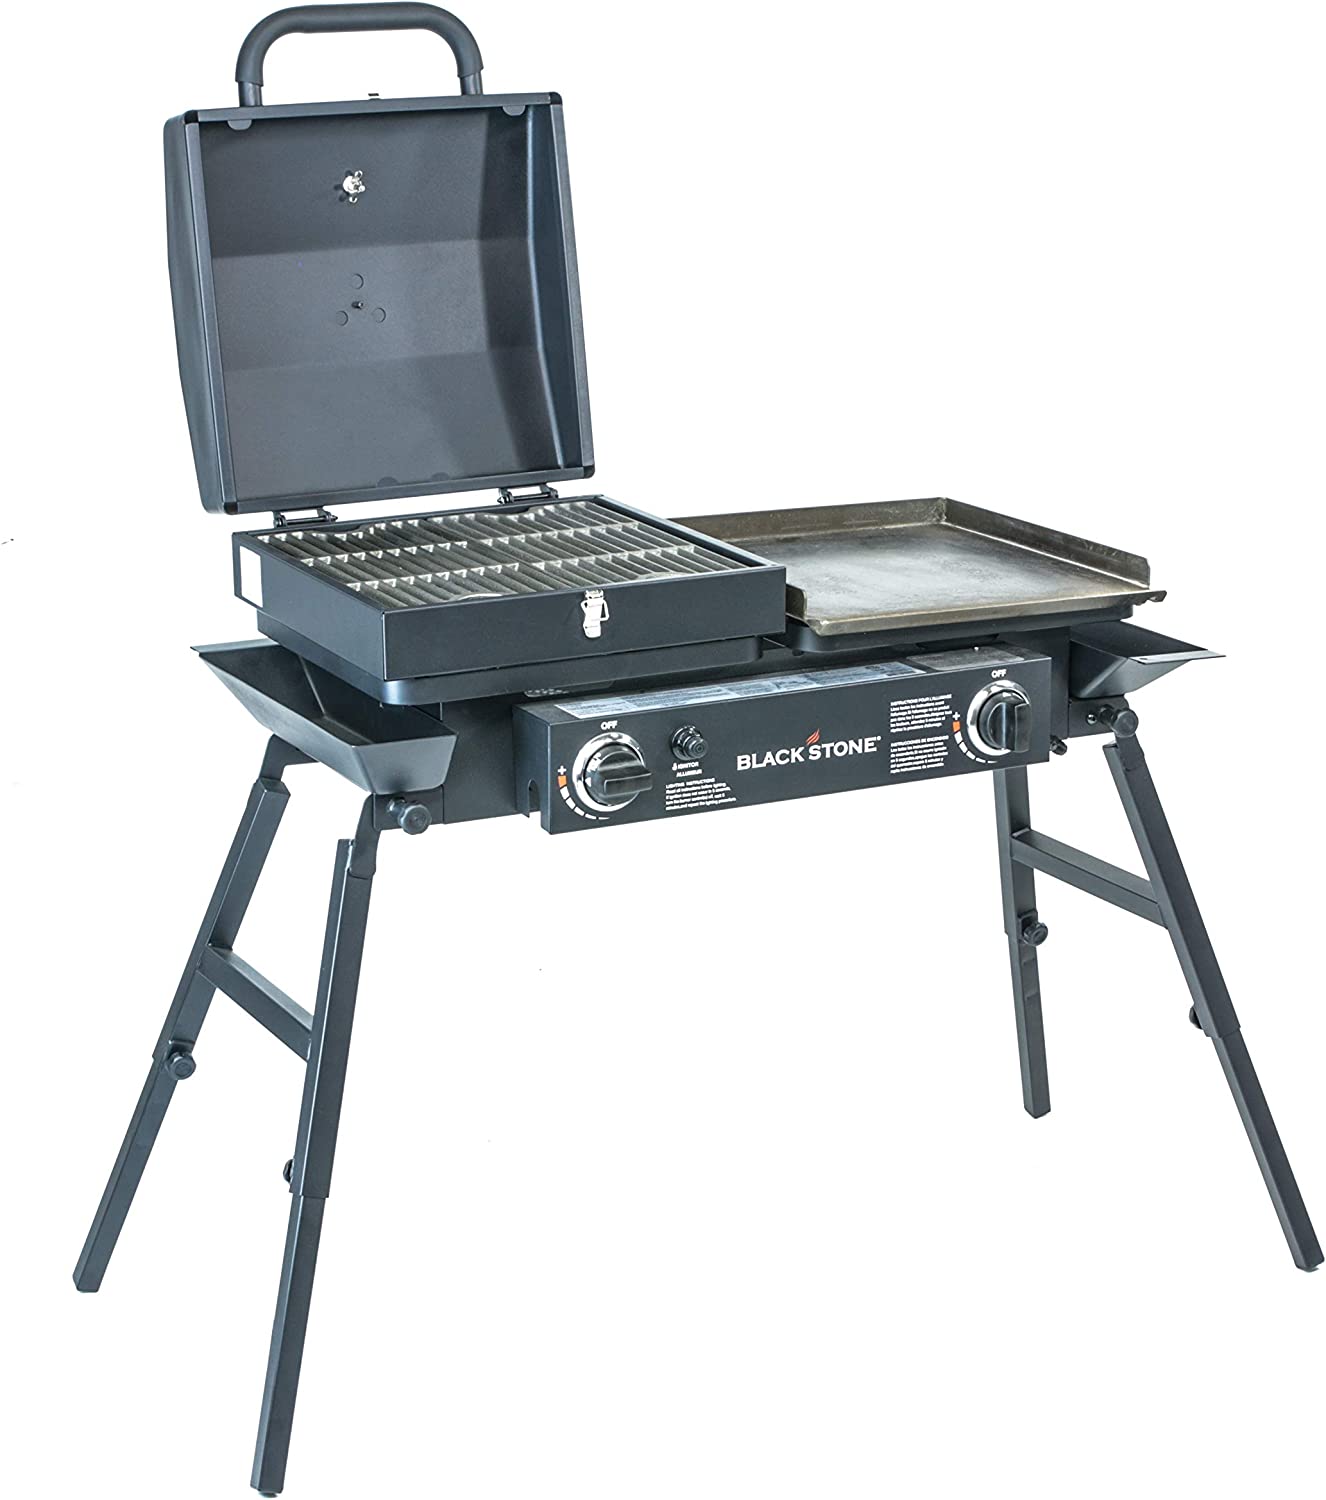 https://bigbigmart.com/wp-content/uploads/2023/06/Blackstone-Tailgater-Stainless-Steel-2-Burner-Portable-Gas-Grill-and-Griddle-Combo-Total-35000-BTUs-for-Indoor-or-Backyard-Outdoor-Patio-Picnic-Garden-Cooking1.jpg